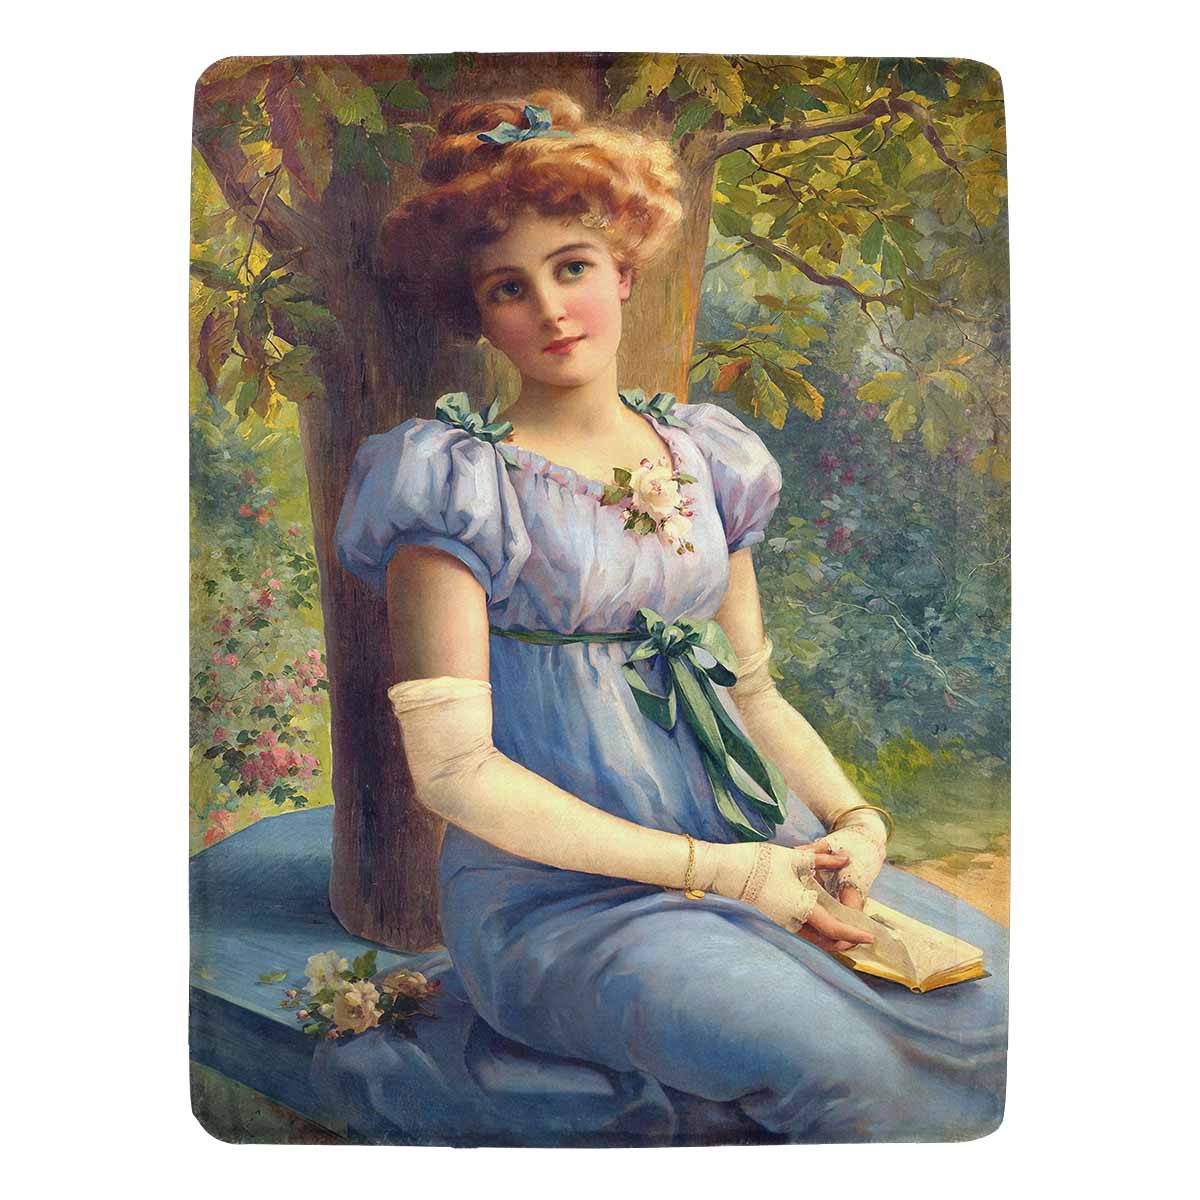 Victorian Lady Design BLANKET, LARGE 60 in x 80 in, A SWEET GLANCE